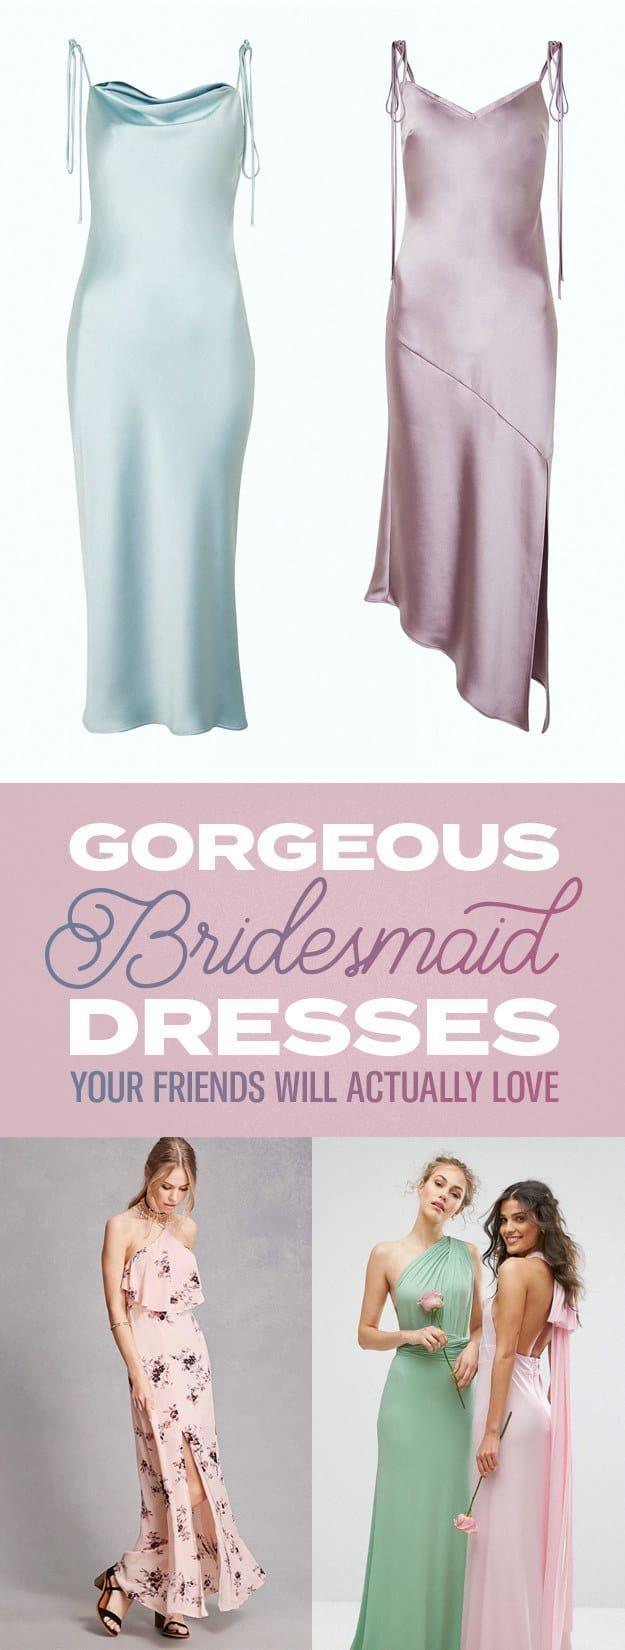 Mariage - 33 Gorgeous Bridesmaid Dresses Your Friends Will Actually Love